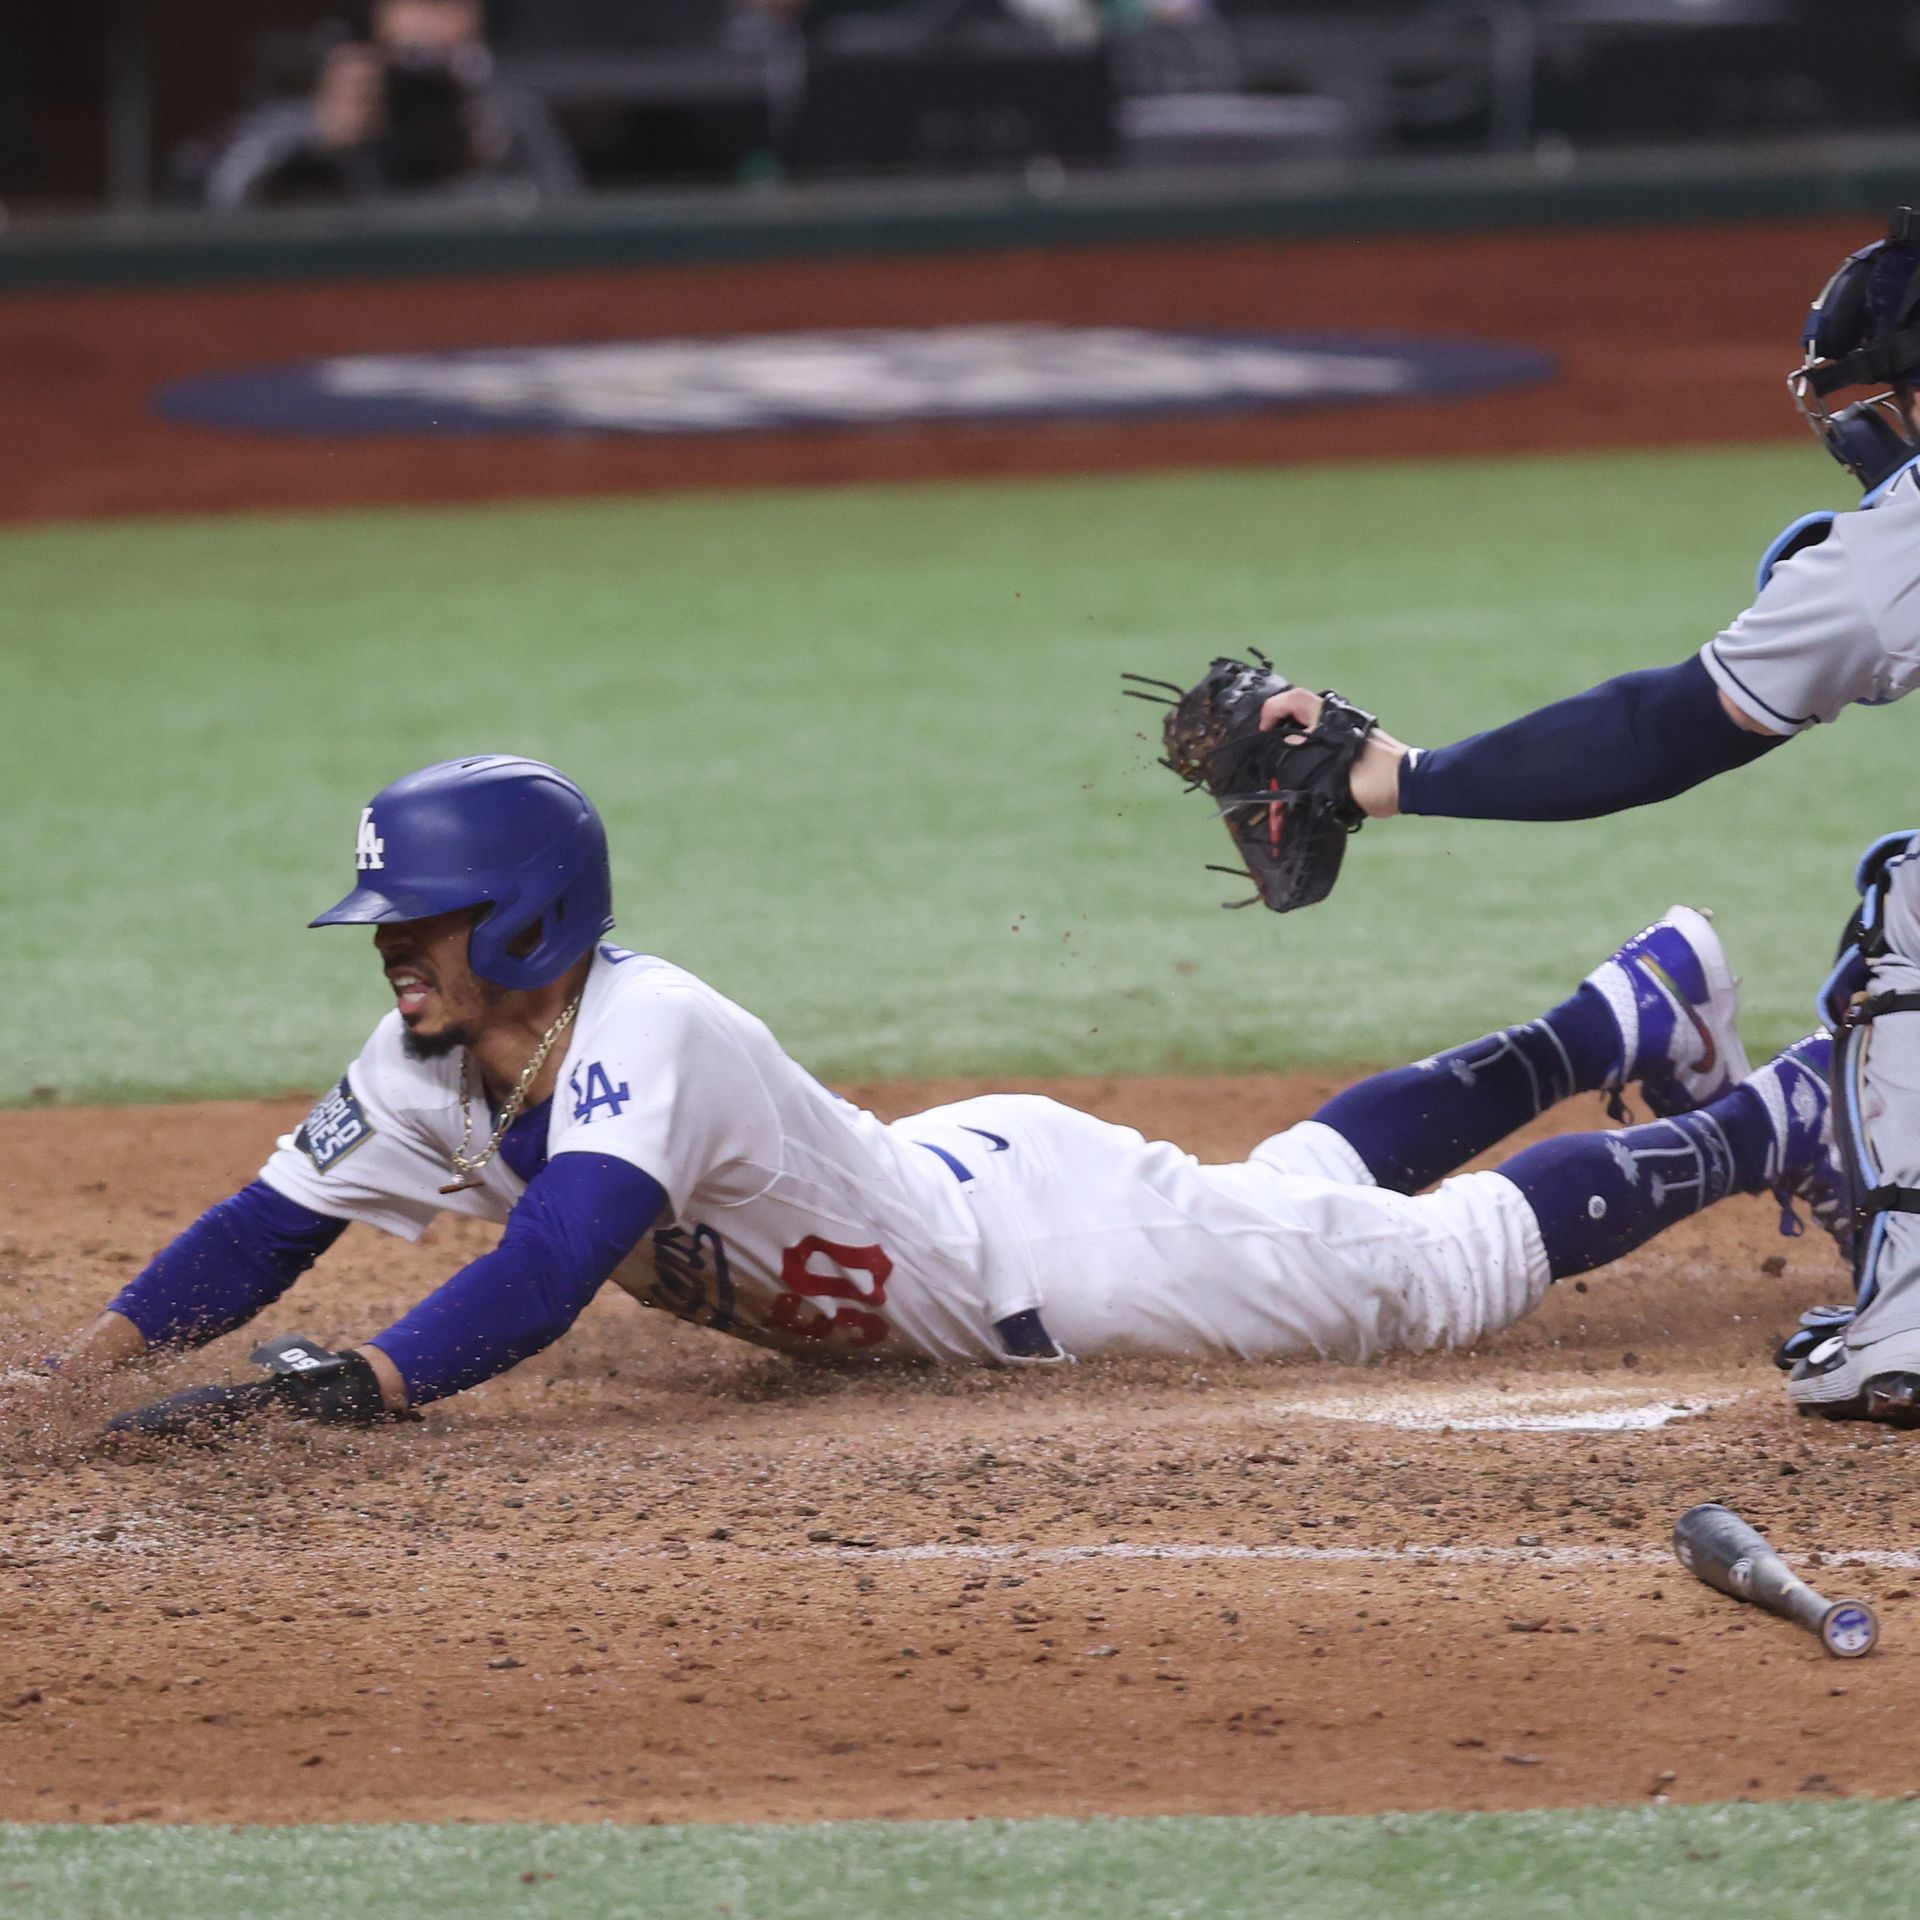 Mookie Betts slides in safe at home plate to give the Dodgers a 2-1 lead in Game 6